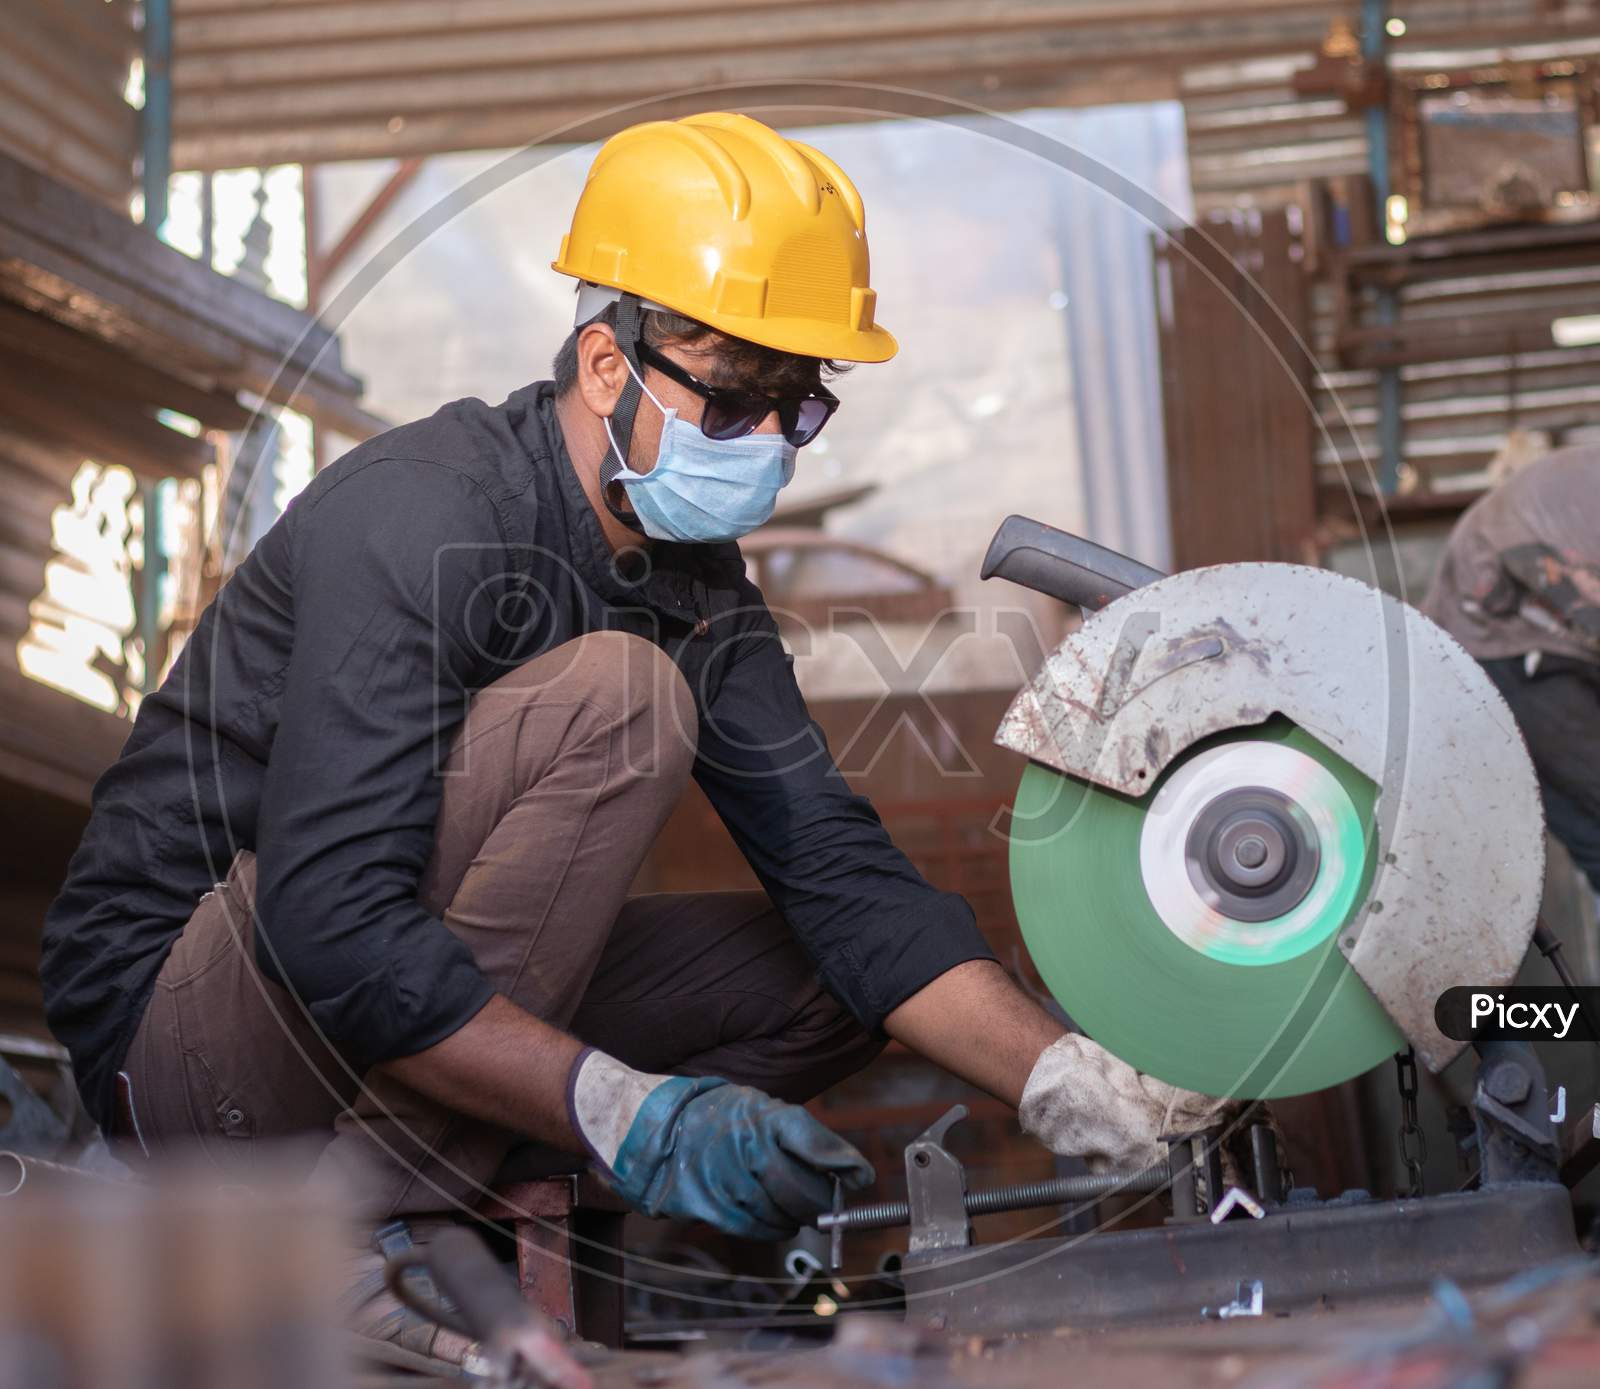 A Young Welder Cutting a Metal Piece with Goggles and Helmet